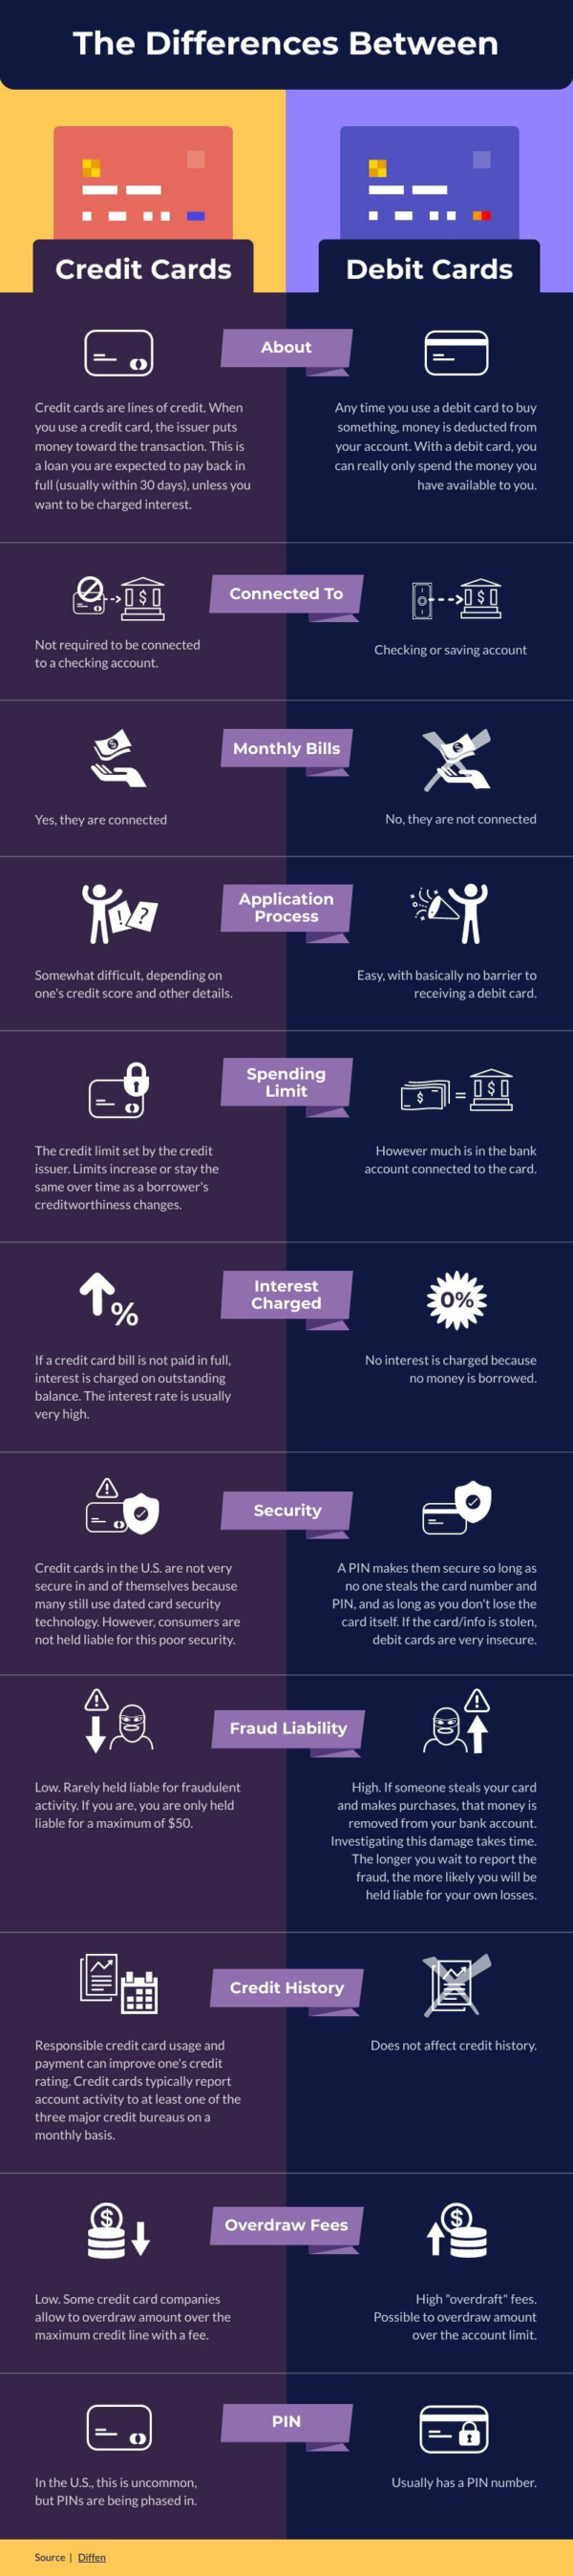 Differences Between Credit Cards and Debit Cards